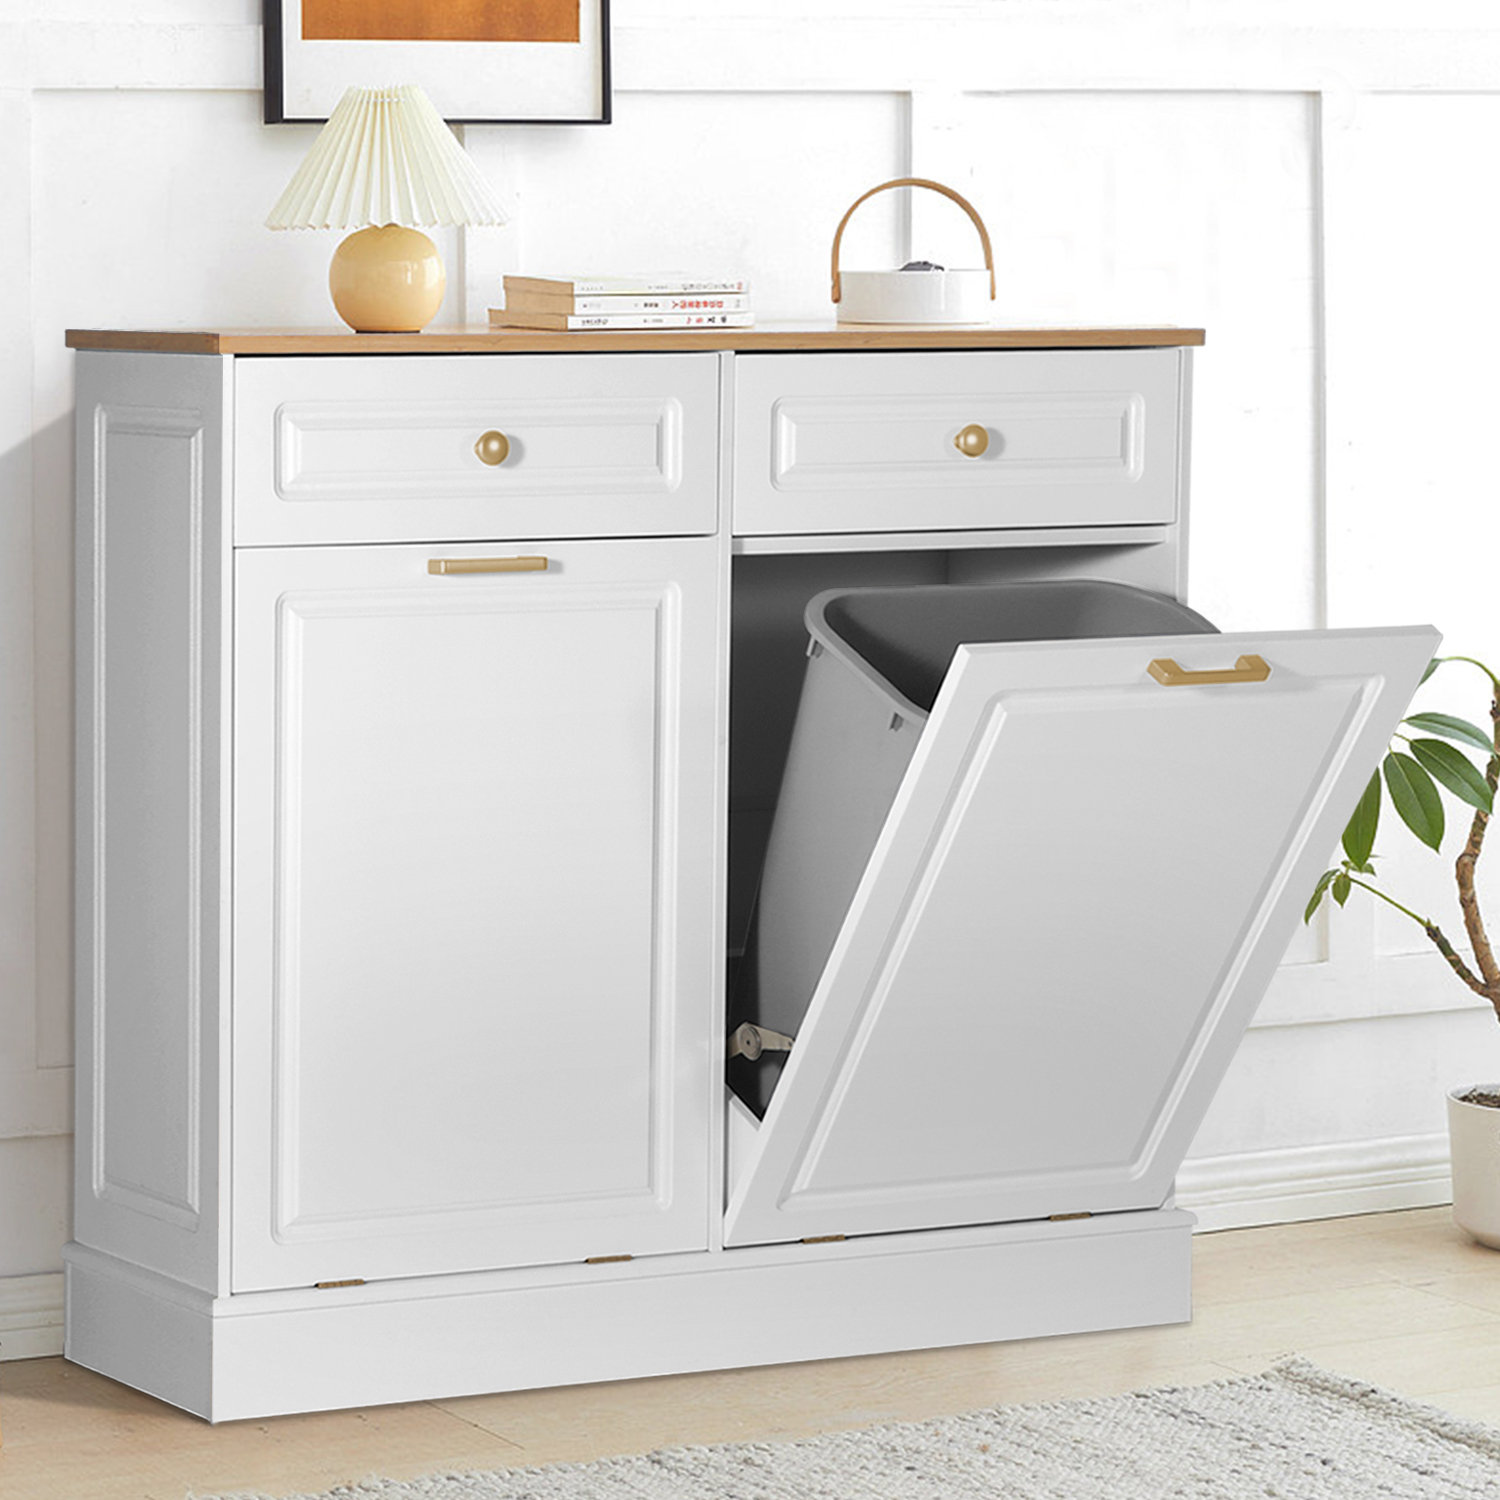 Pull Out Sliding Drawer-shelf elegance With Open 